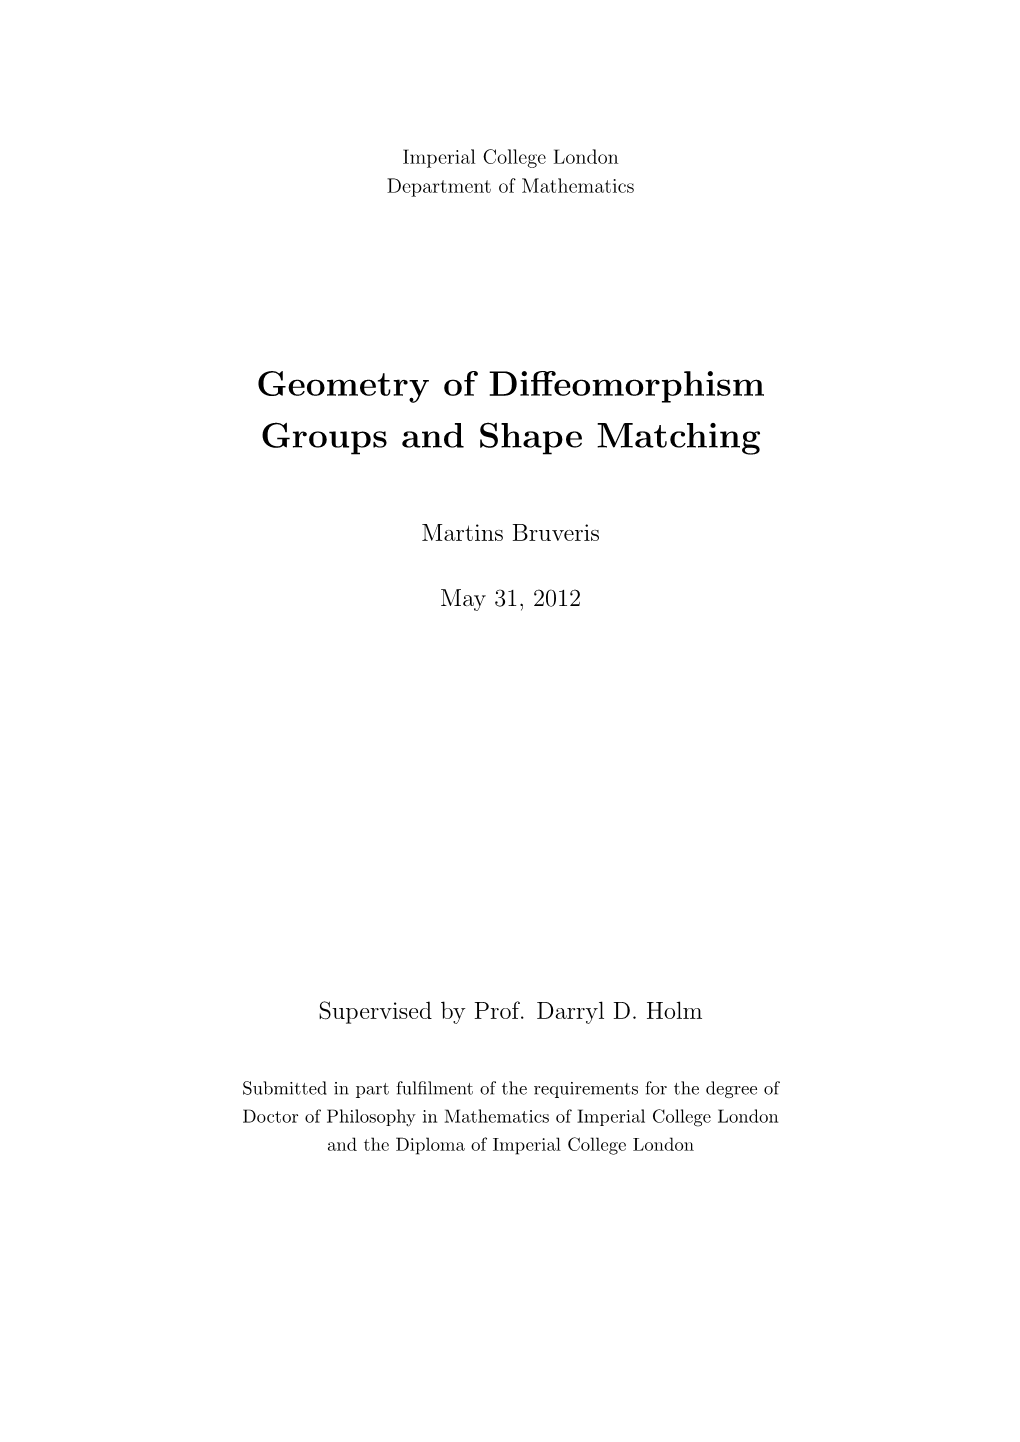 Geometry of Diffeomorphism Groups and Shape Matching